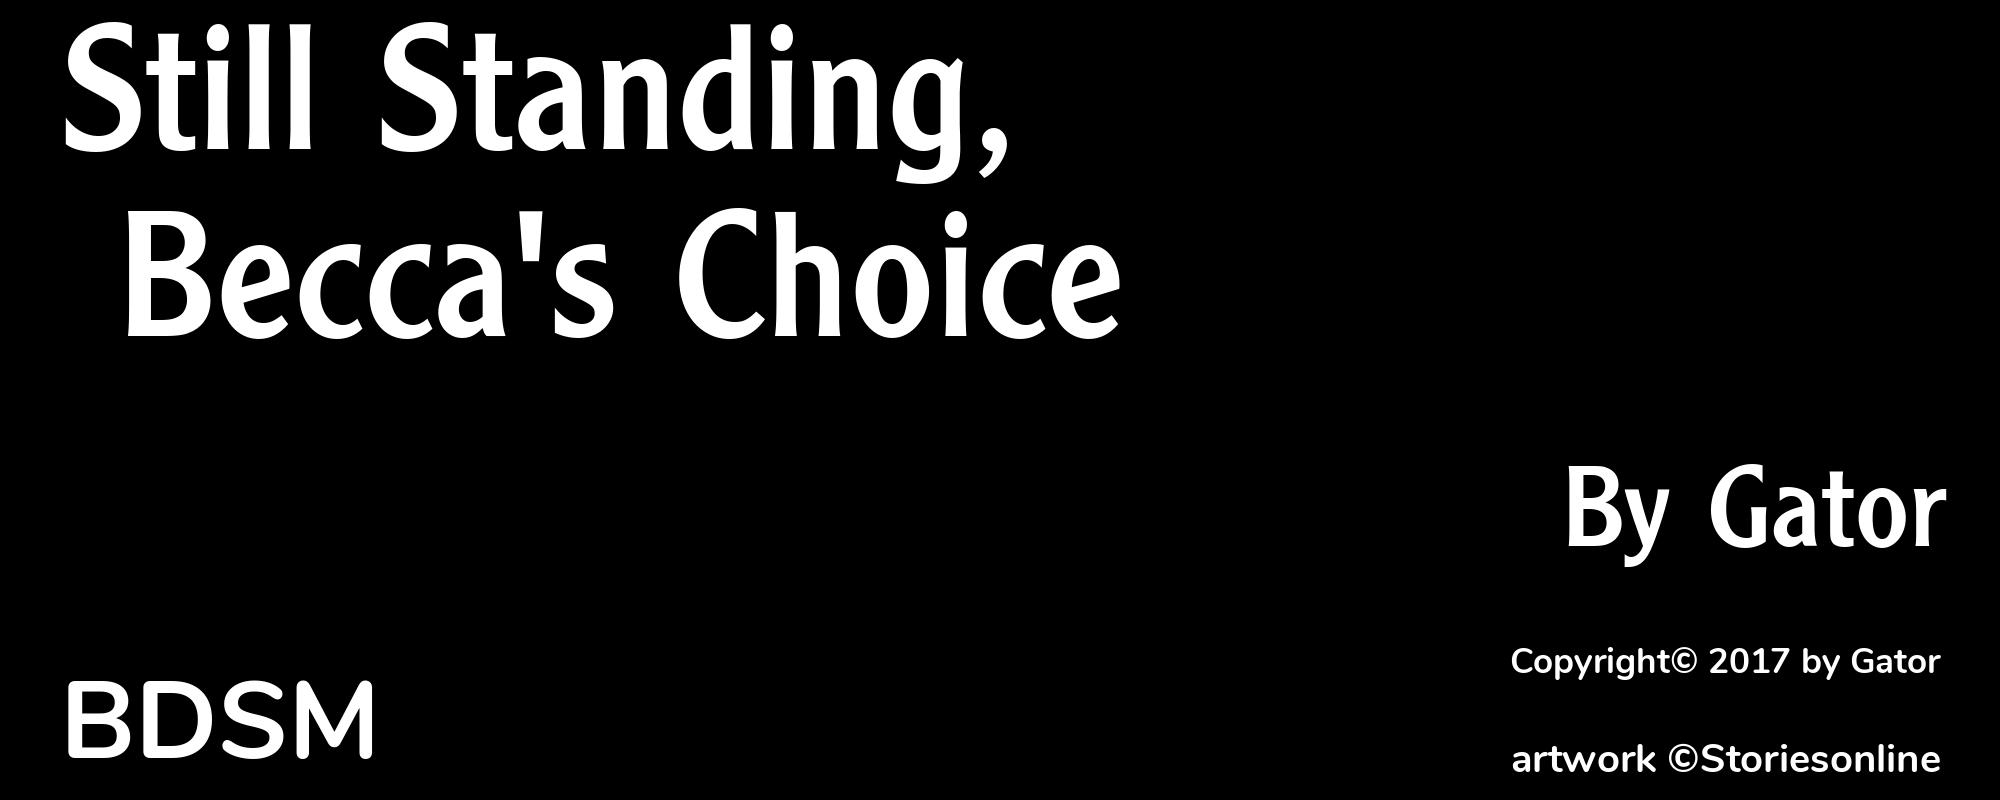 Still Standing, Becca's Choice - Cover